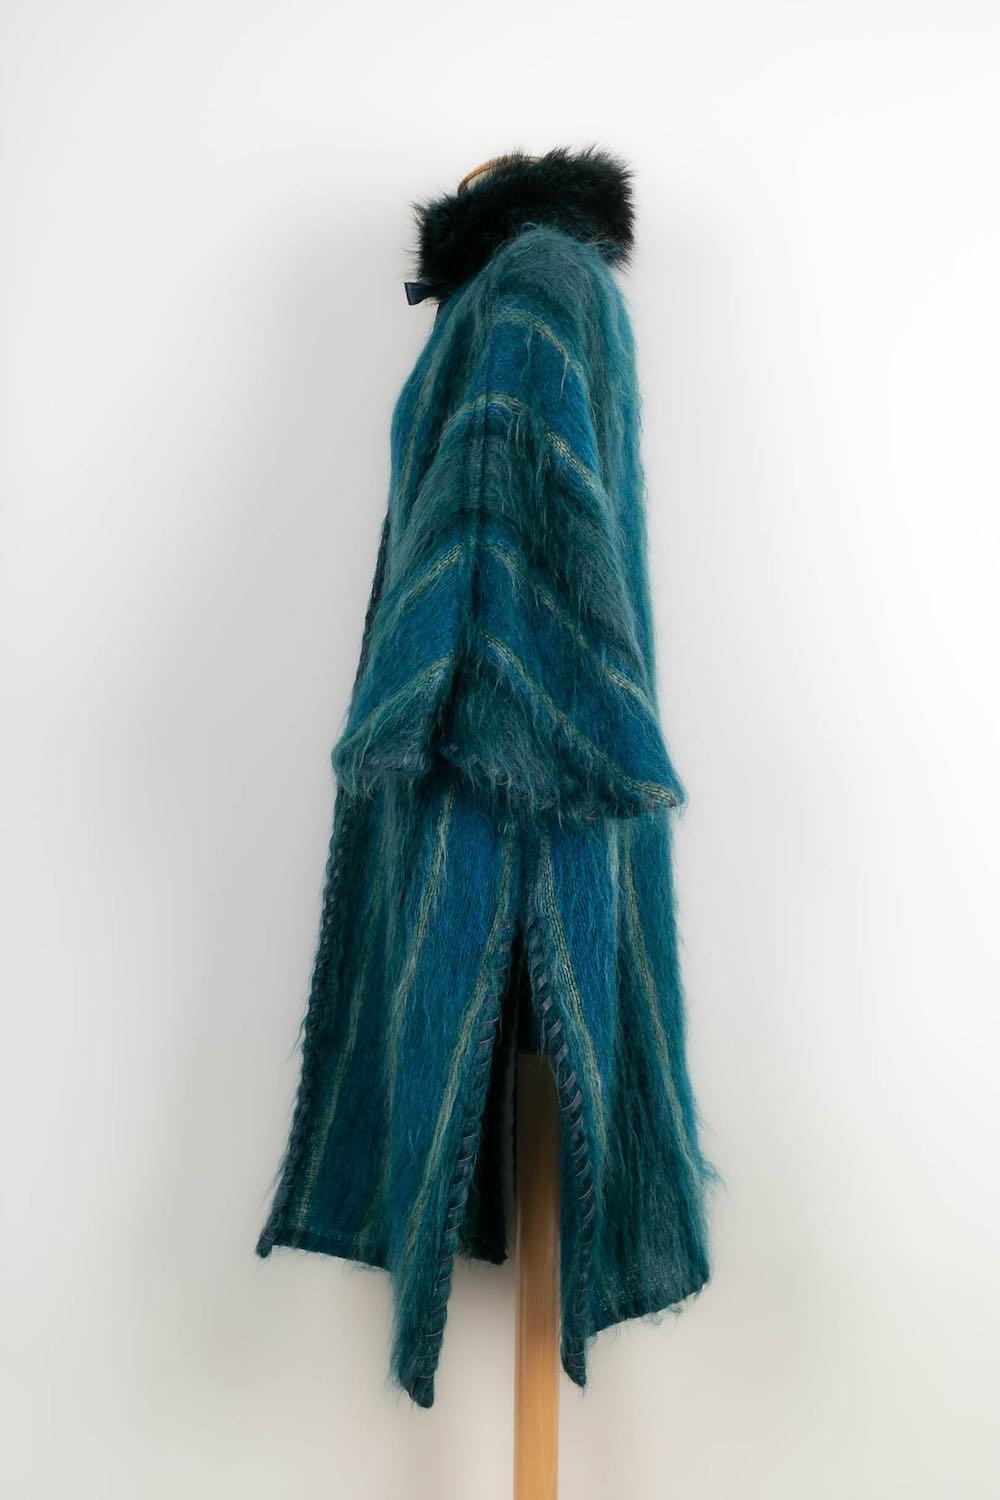 Dior -(Made in France) Long mohair and fur coat in shades of blue. No size label, it fits a 38FR/40FR/42FR

Additional information: 
Dimensions: Length: 110 cm
Condition: Very good condition
Seller Ref number: M17BIS